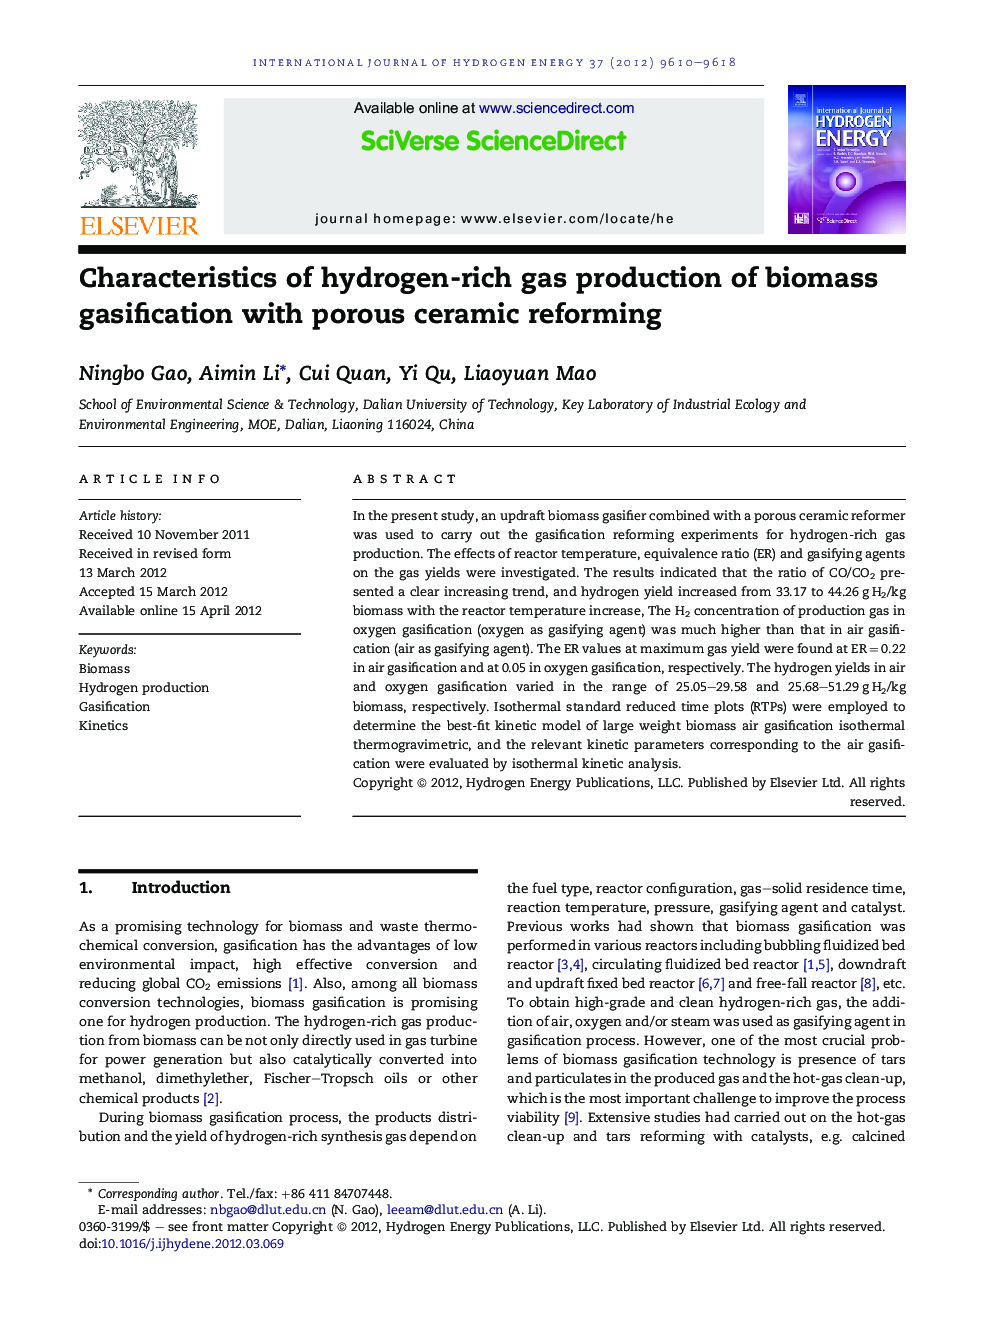 Characteristics of hydrogen-rich gas production of biomass gasification with porous ceramic reforming